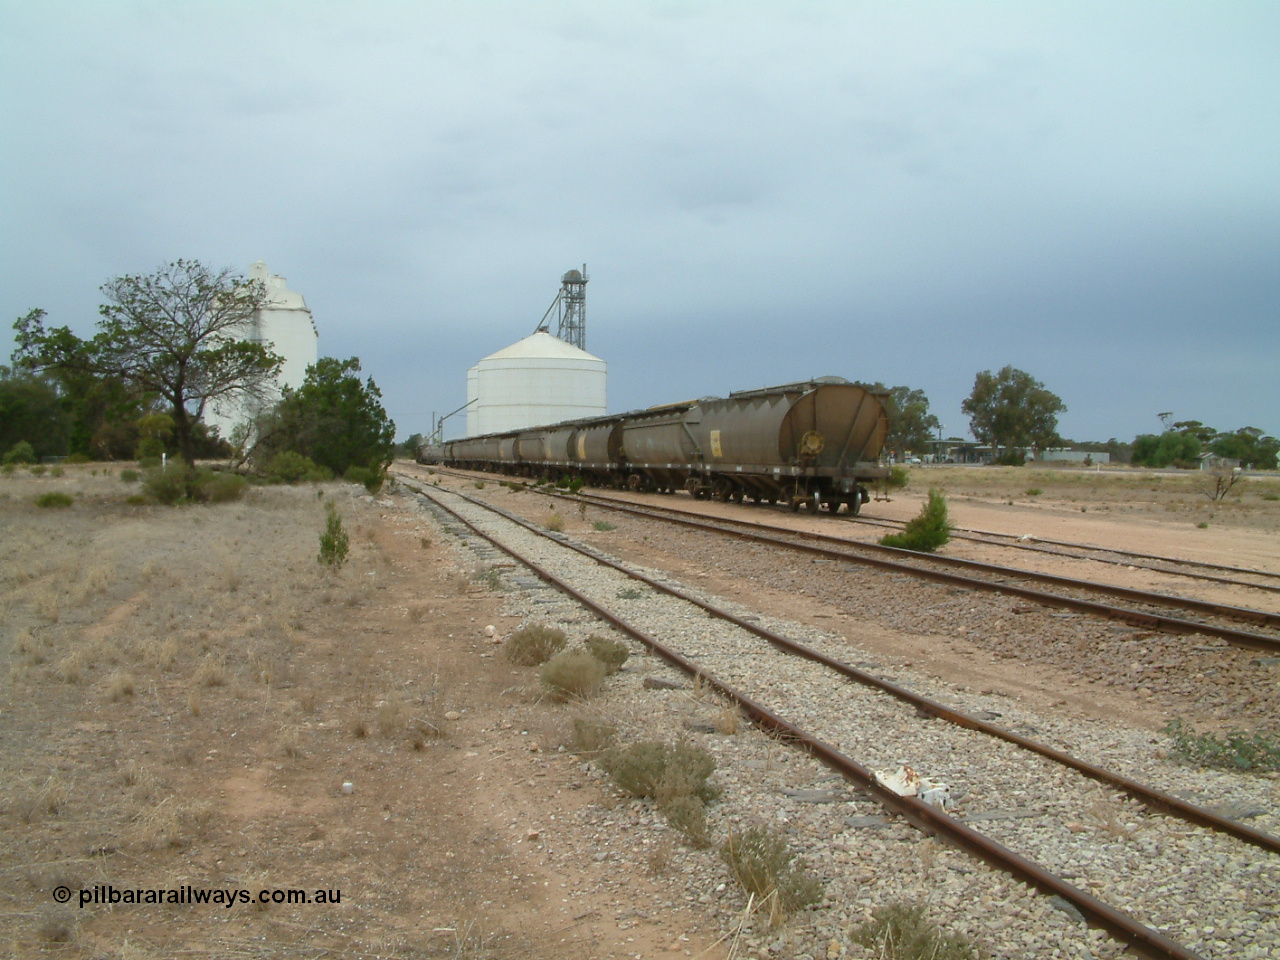 030407 105420
Poochera, yard view looking south across the goods siding, min line and grain siding with loading of a grain rake taking place on the grain siding with the Ascom silo complex behind. 7th April 2003.
